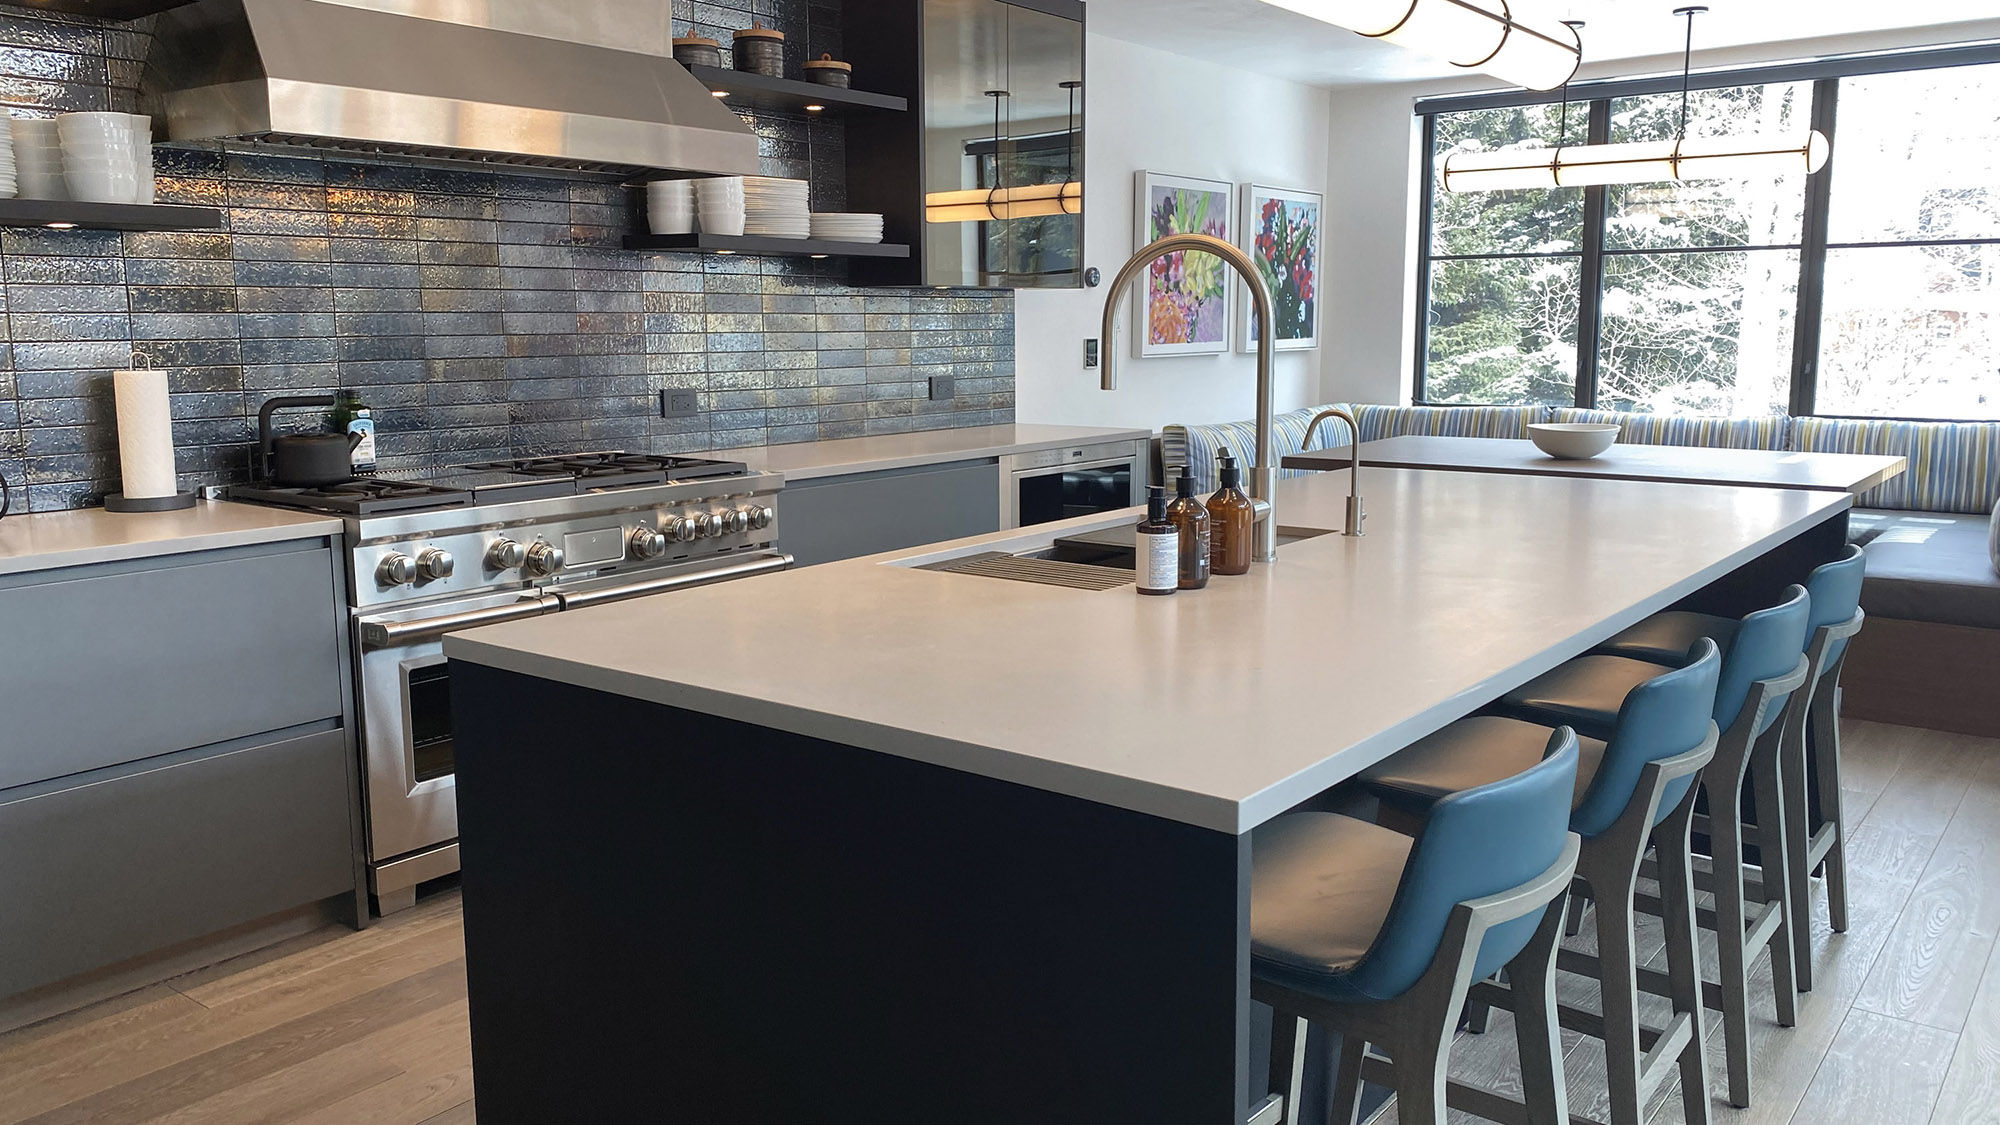 While the property is located in downtown Aspen just steps from Restaurant Row, the Aspen Street Lodge includes a kitchen any cook would love.